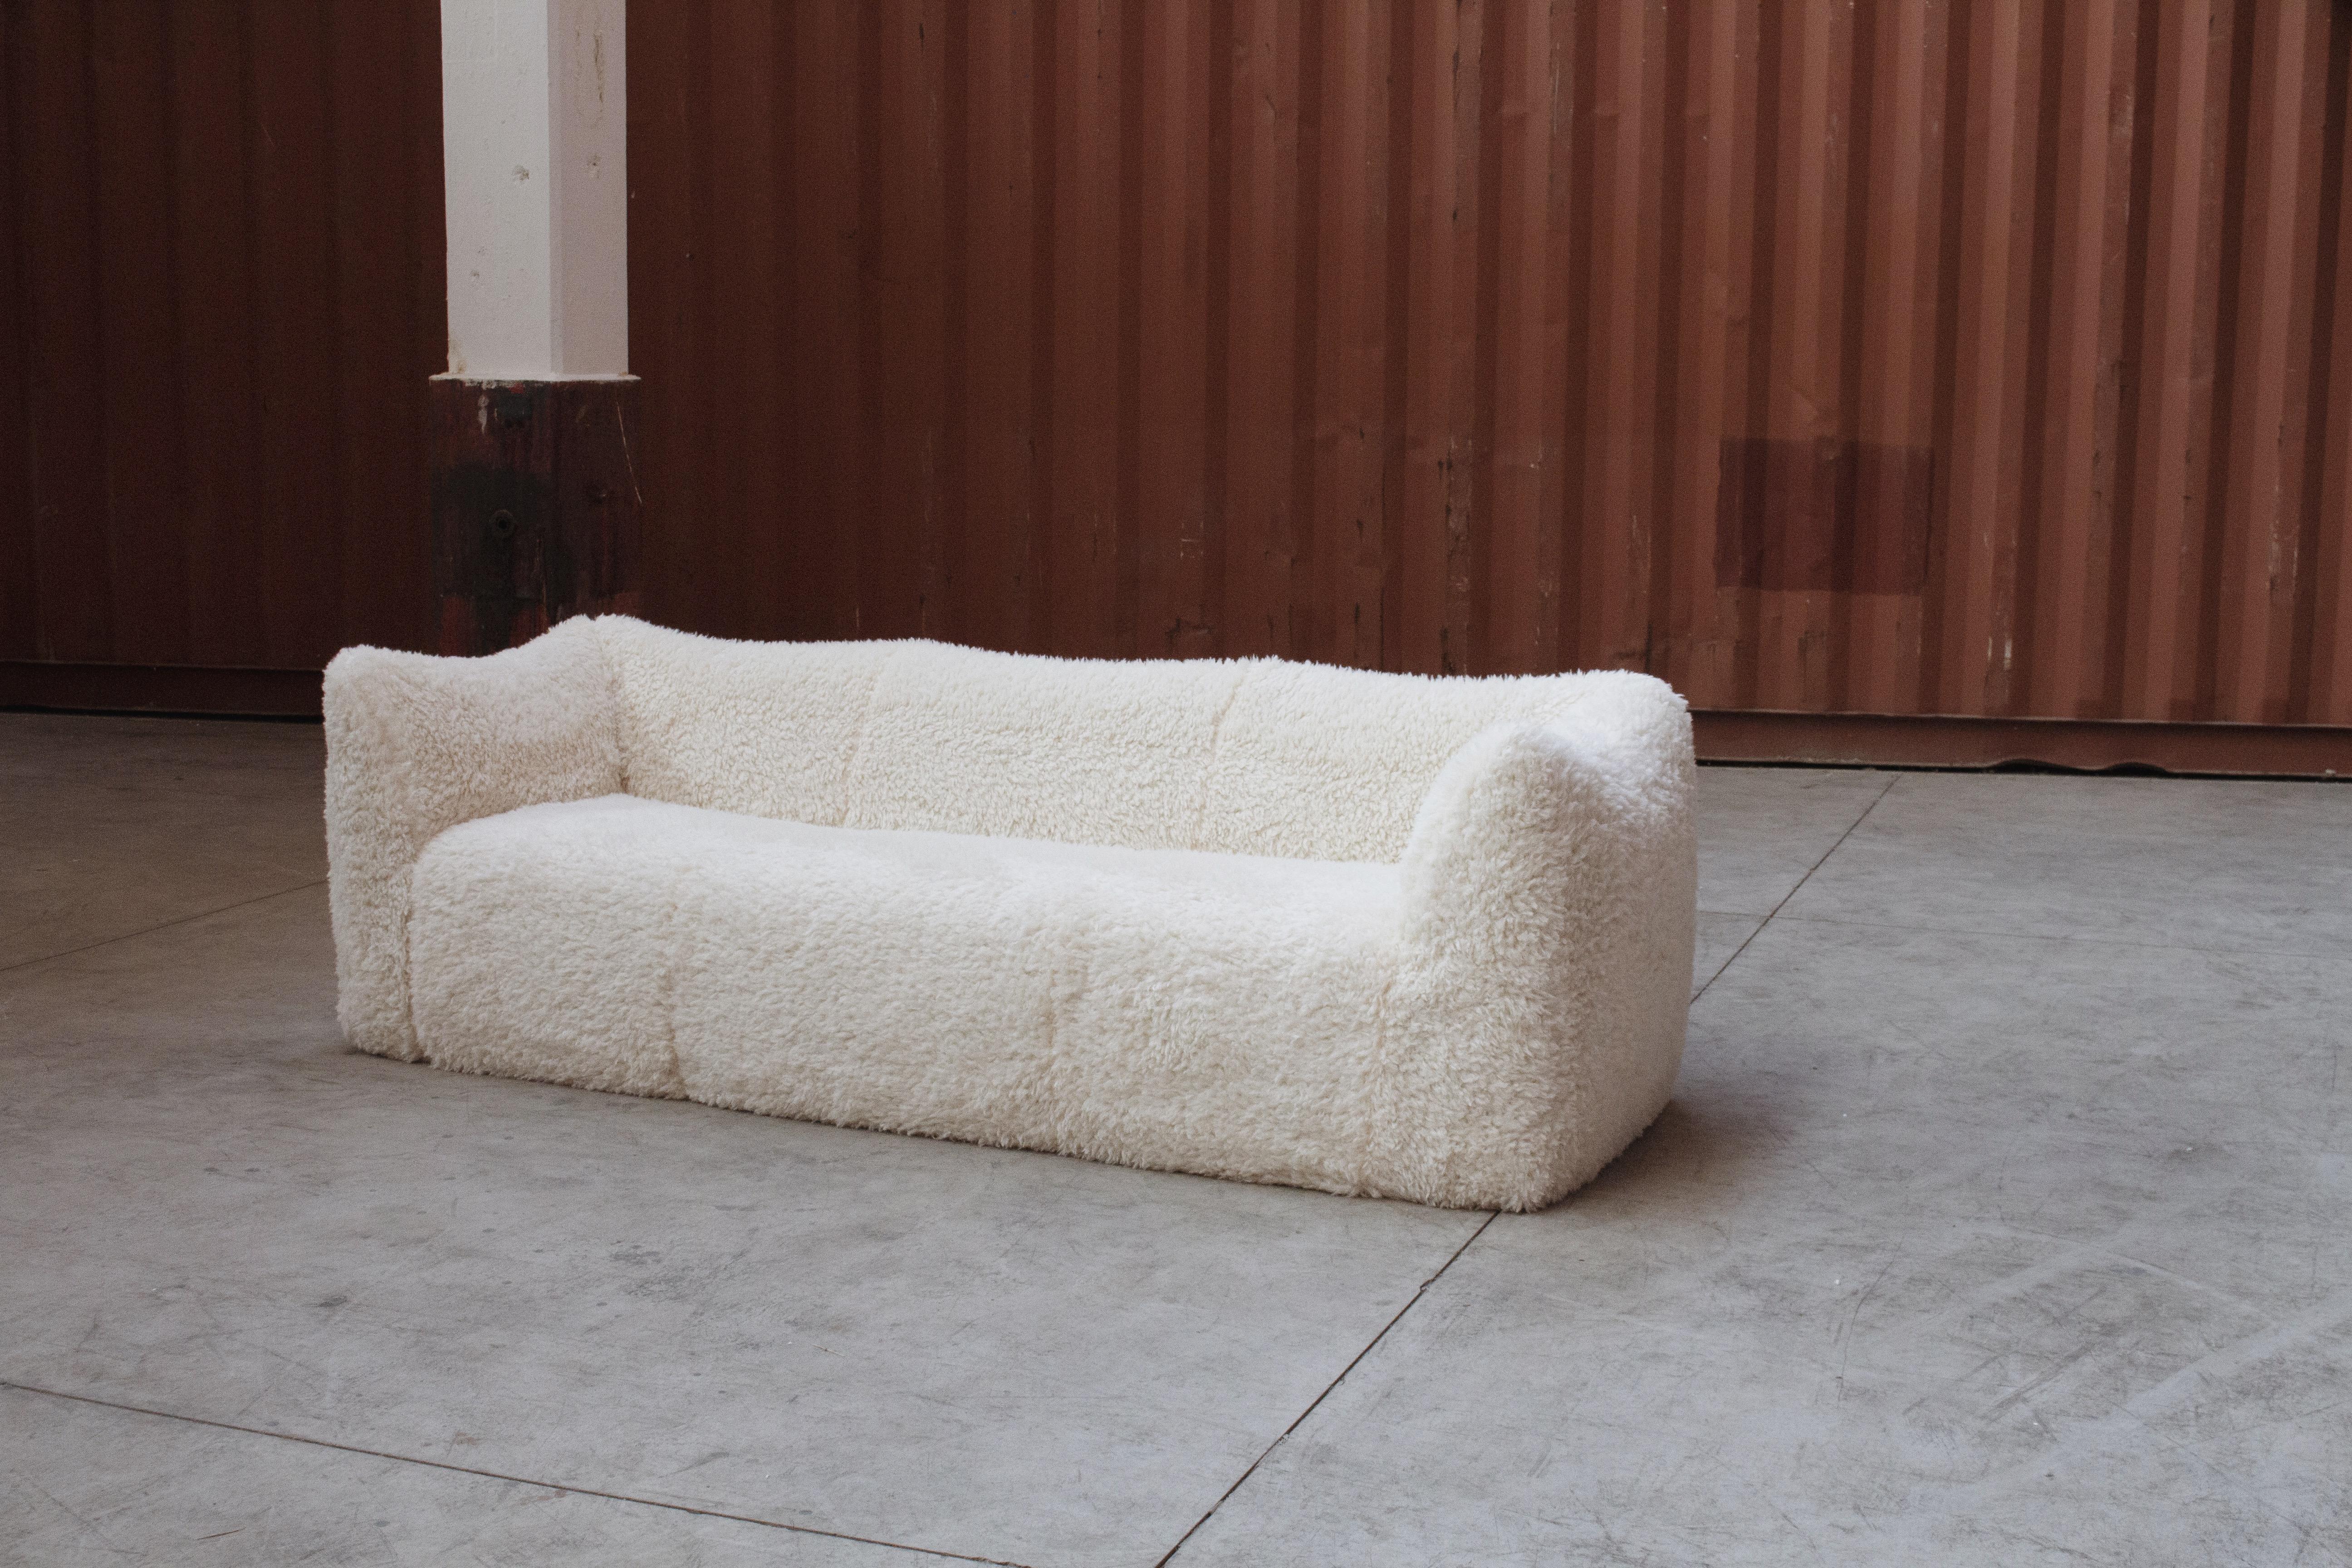 Mario Bellini “Le Bambole” three-seater sofa for B&B Italia, special edition in Mongolian sheepskin. 

The starting point was a shopping bag that contained formless material that was shaped when the bag was set on the ground and squashed. In the